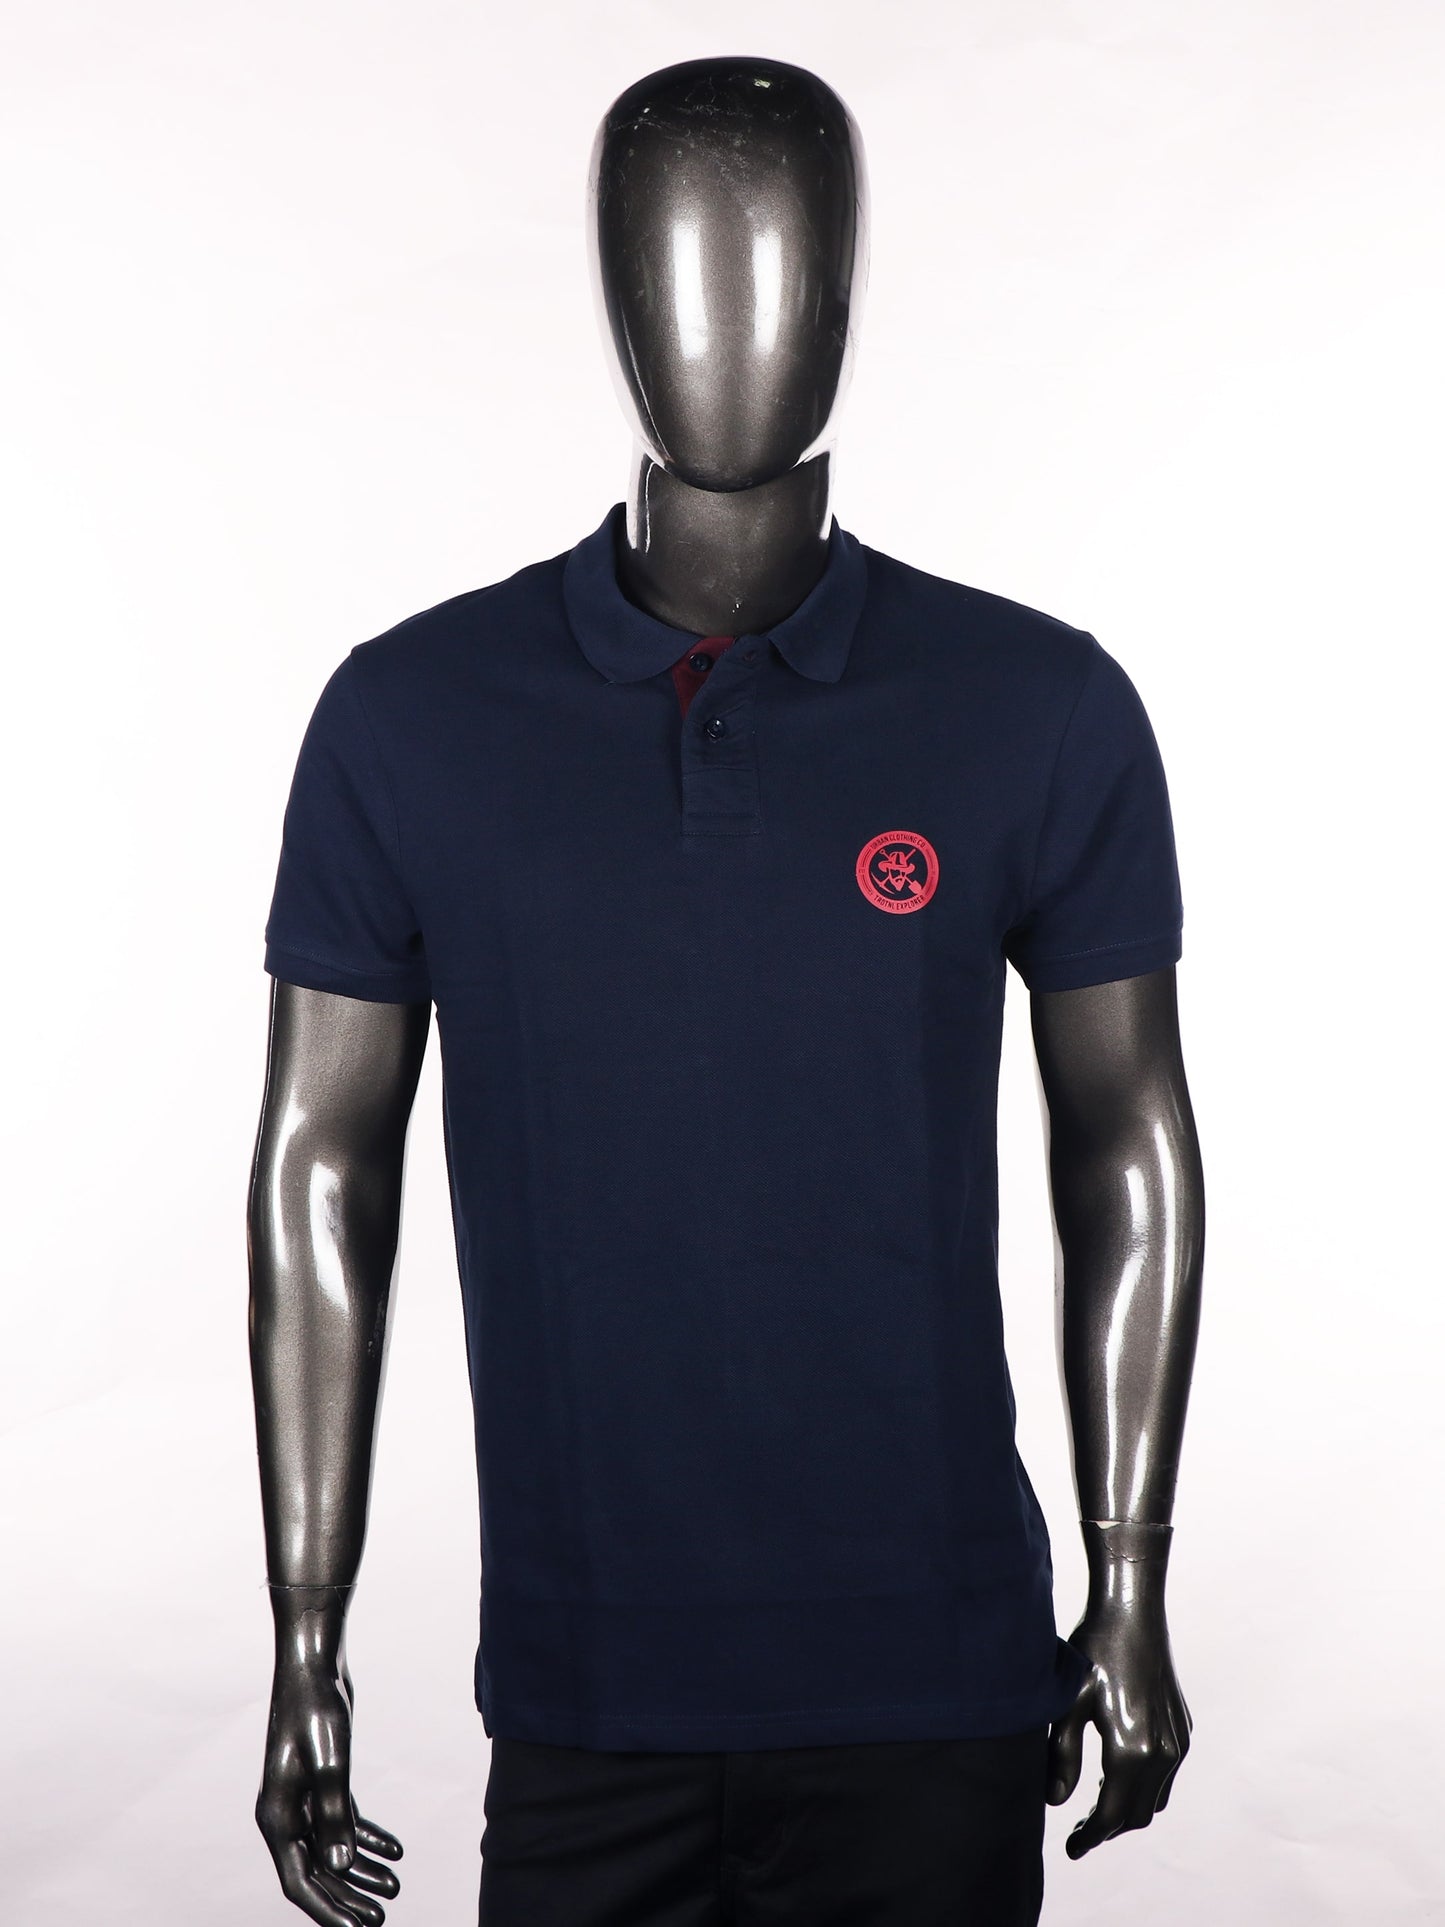 Slim Fit Navy Color Polo T-Shirt in pique fabric